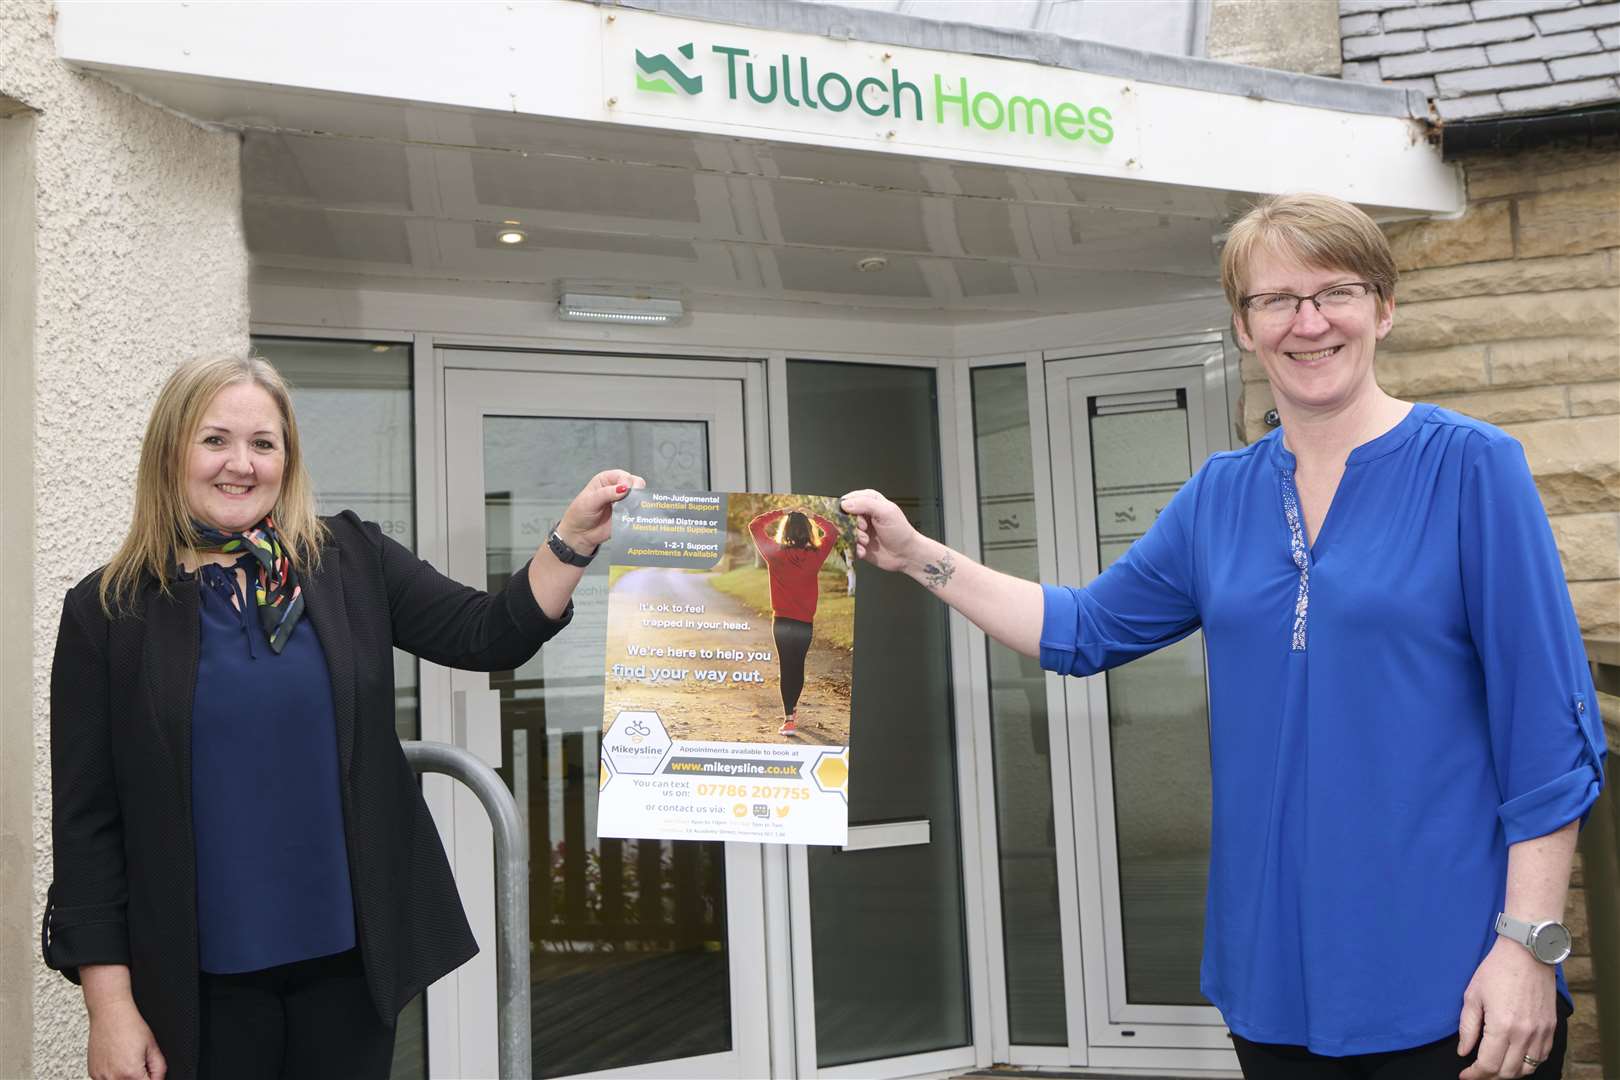 Tulloch Homes HR director Lorna Cameron with Mikeysline chairwoman Donna Smith.